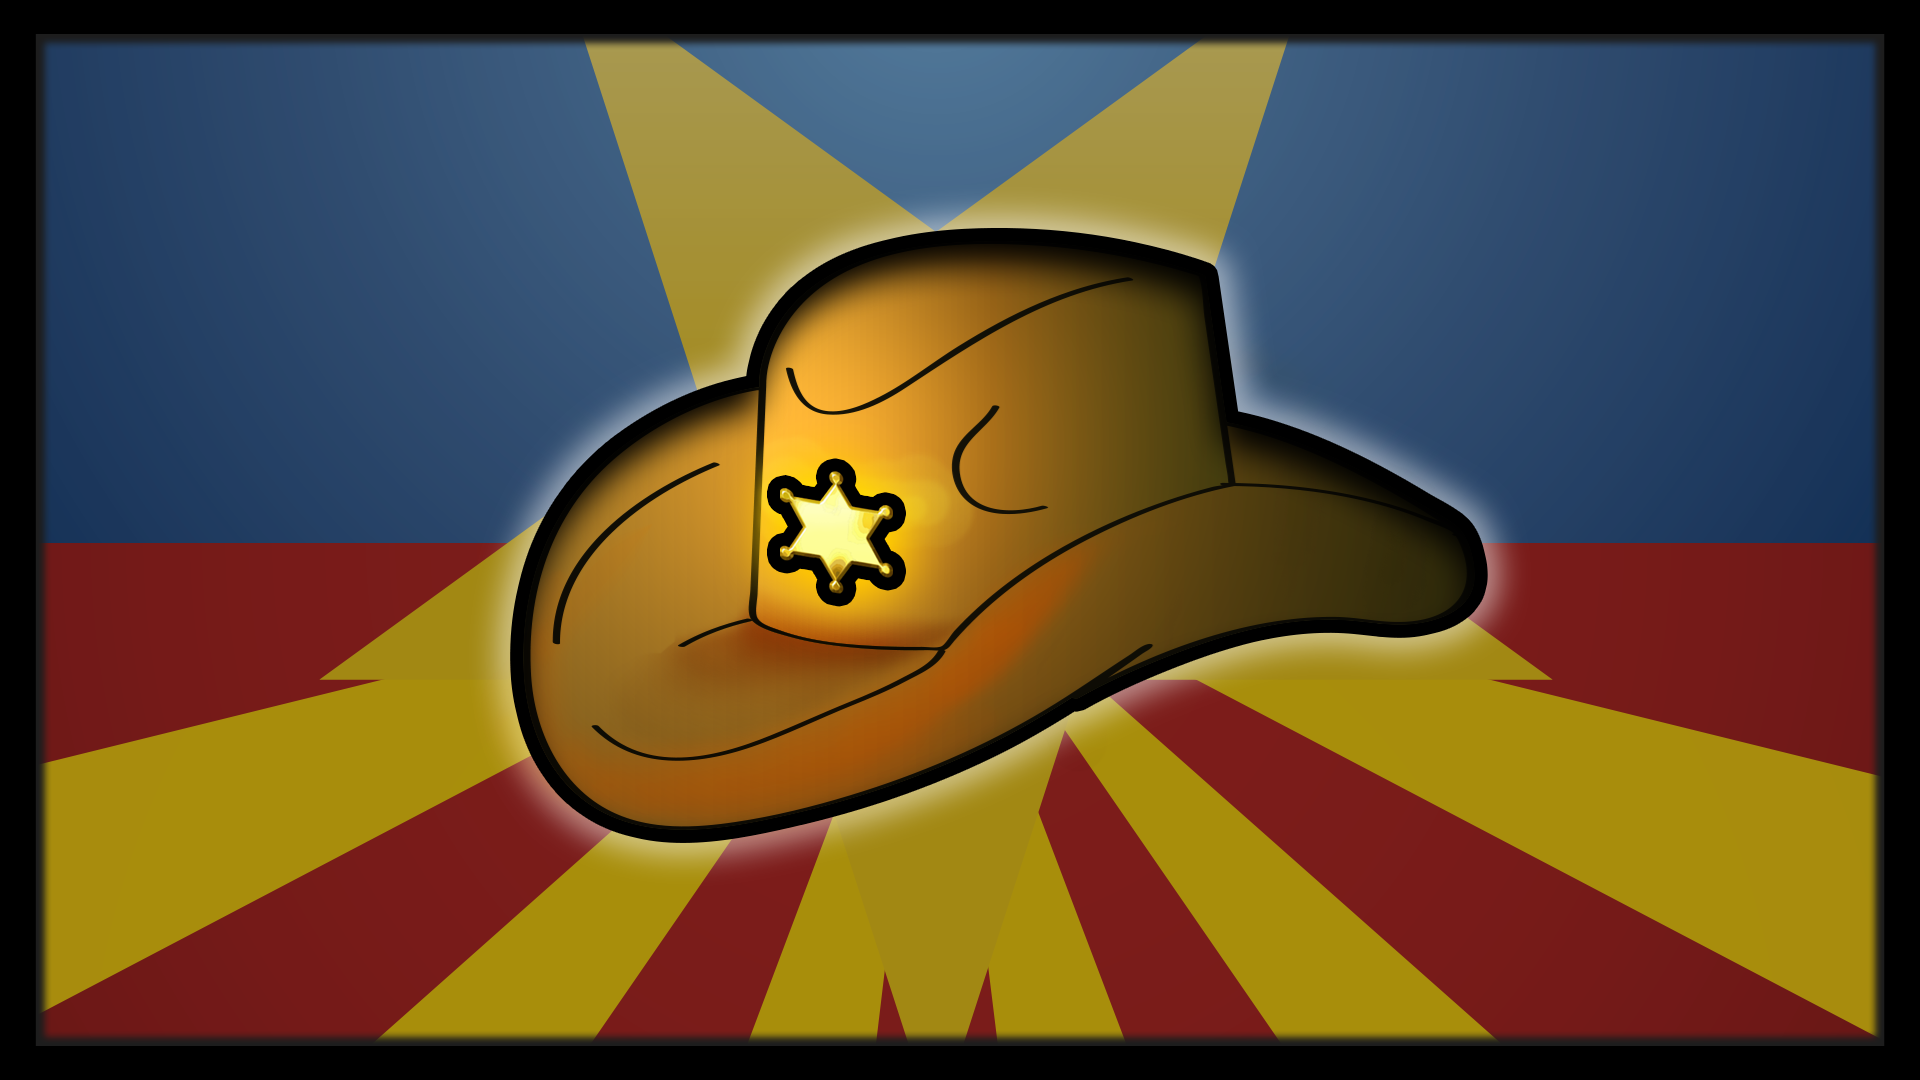 Icon for We have ourselves a Cowboy